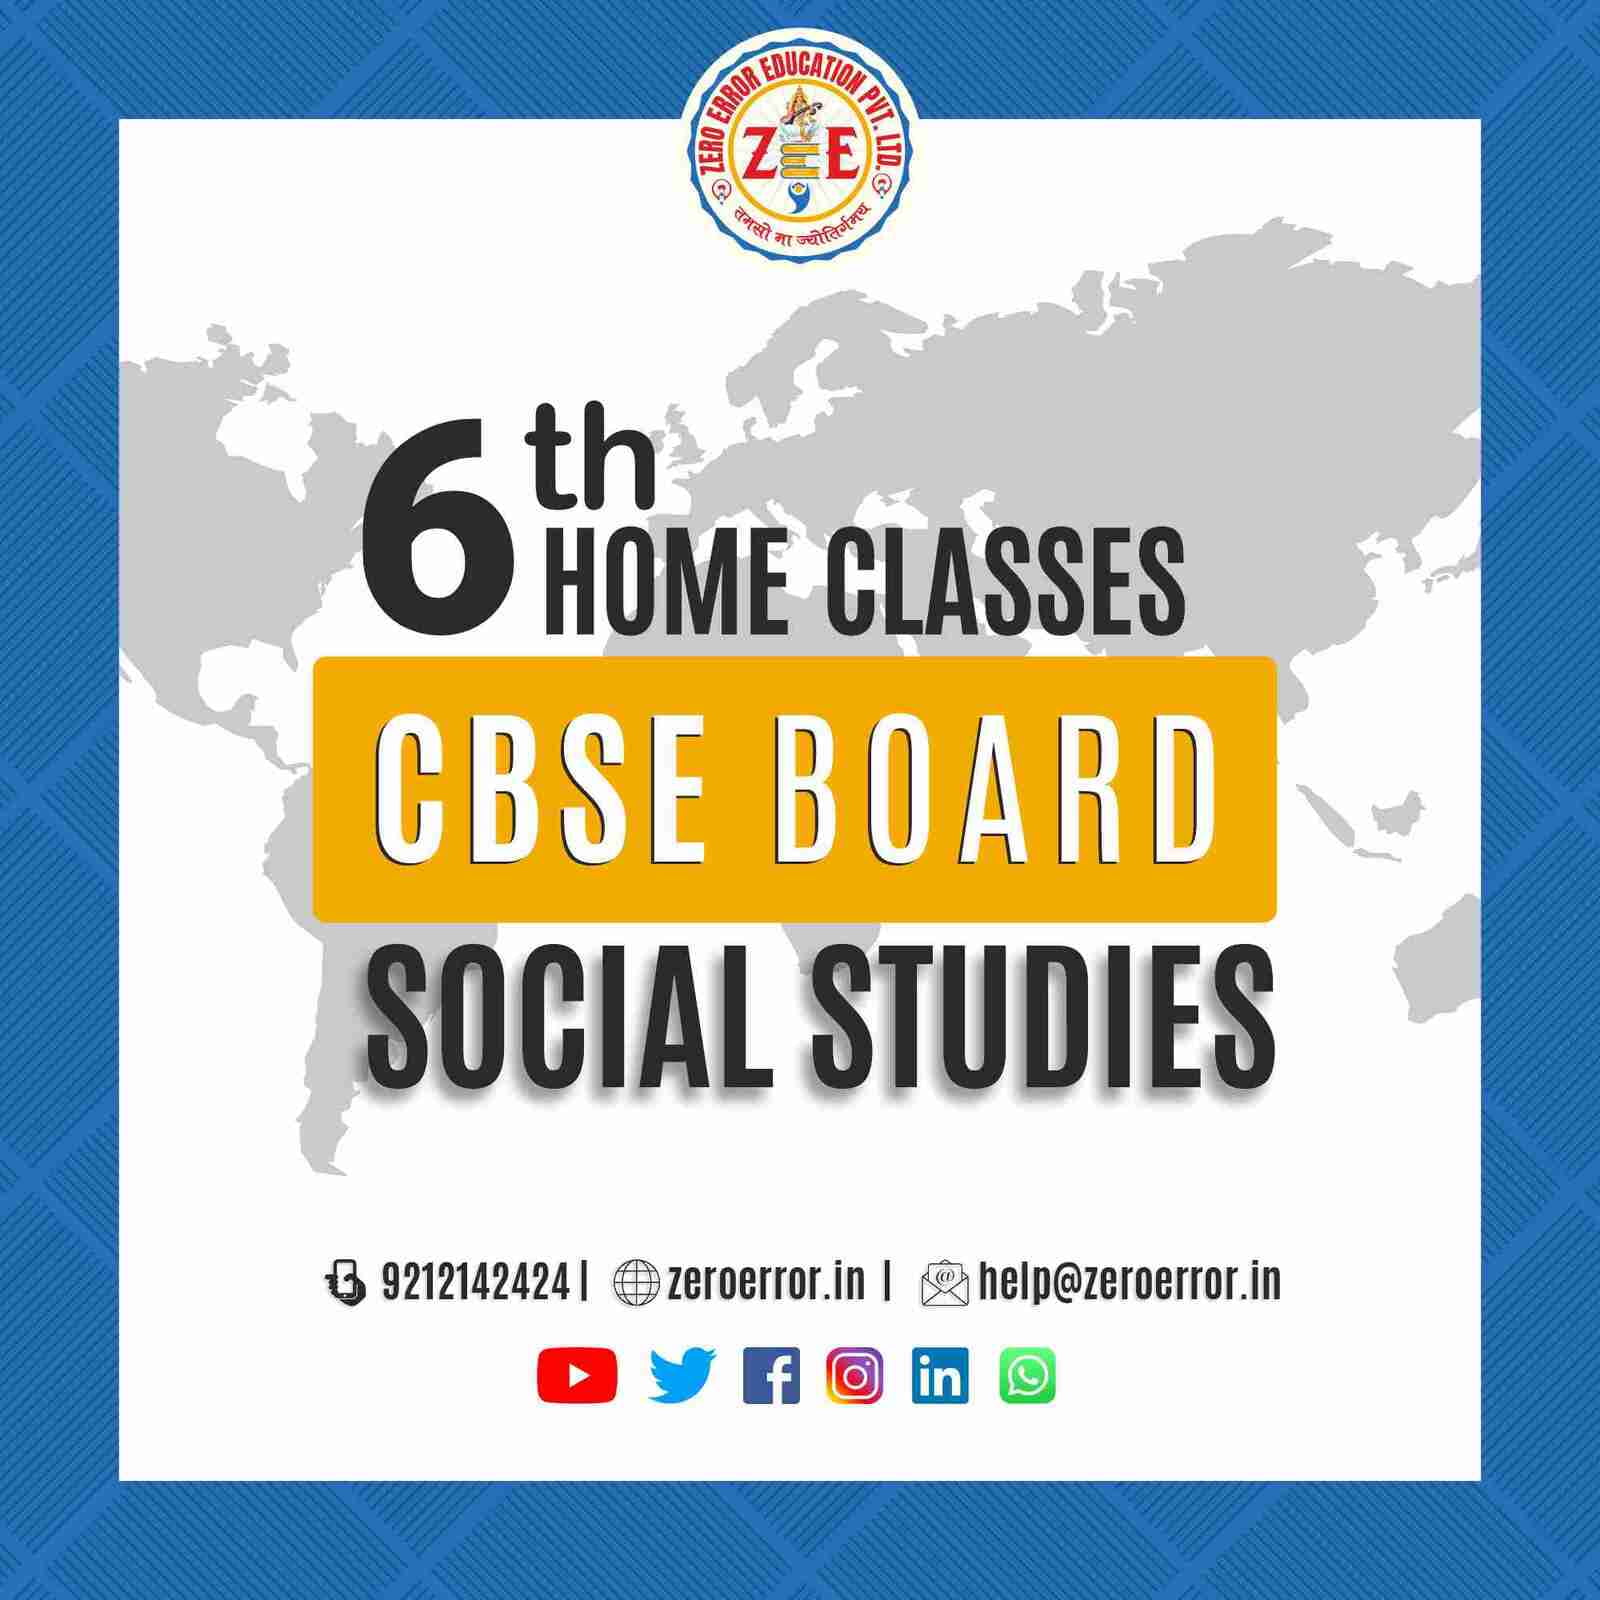 6th Grade CBSE Social Science Online Classes by Zero Error Education Prepare for your CBSE board exams with online and offline SST classes for 6th grade. Learn from experienced home tutors and get all the help you need to succeed. Enroll today at Zero Error Education. [https://zeroerror.in/] Call 9212142424 for more information.